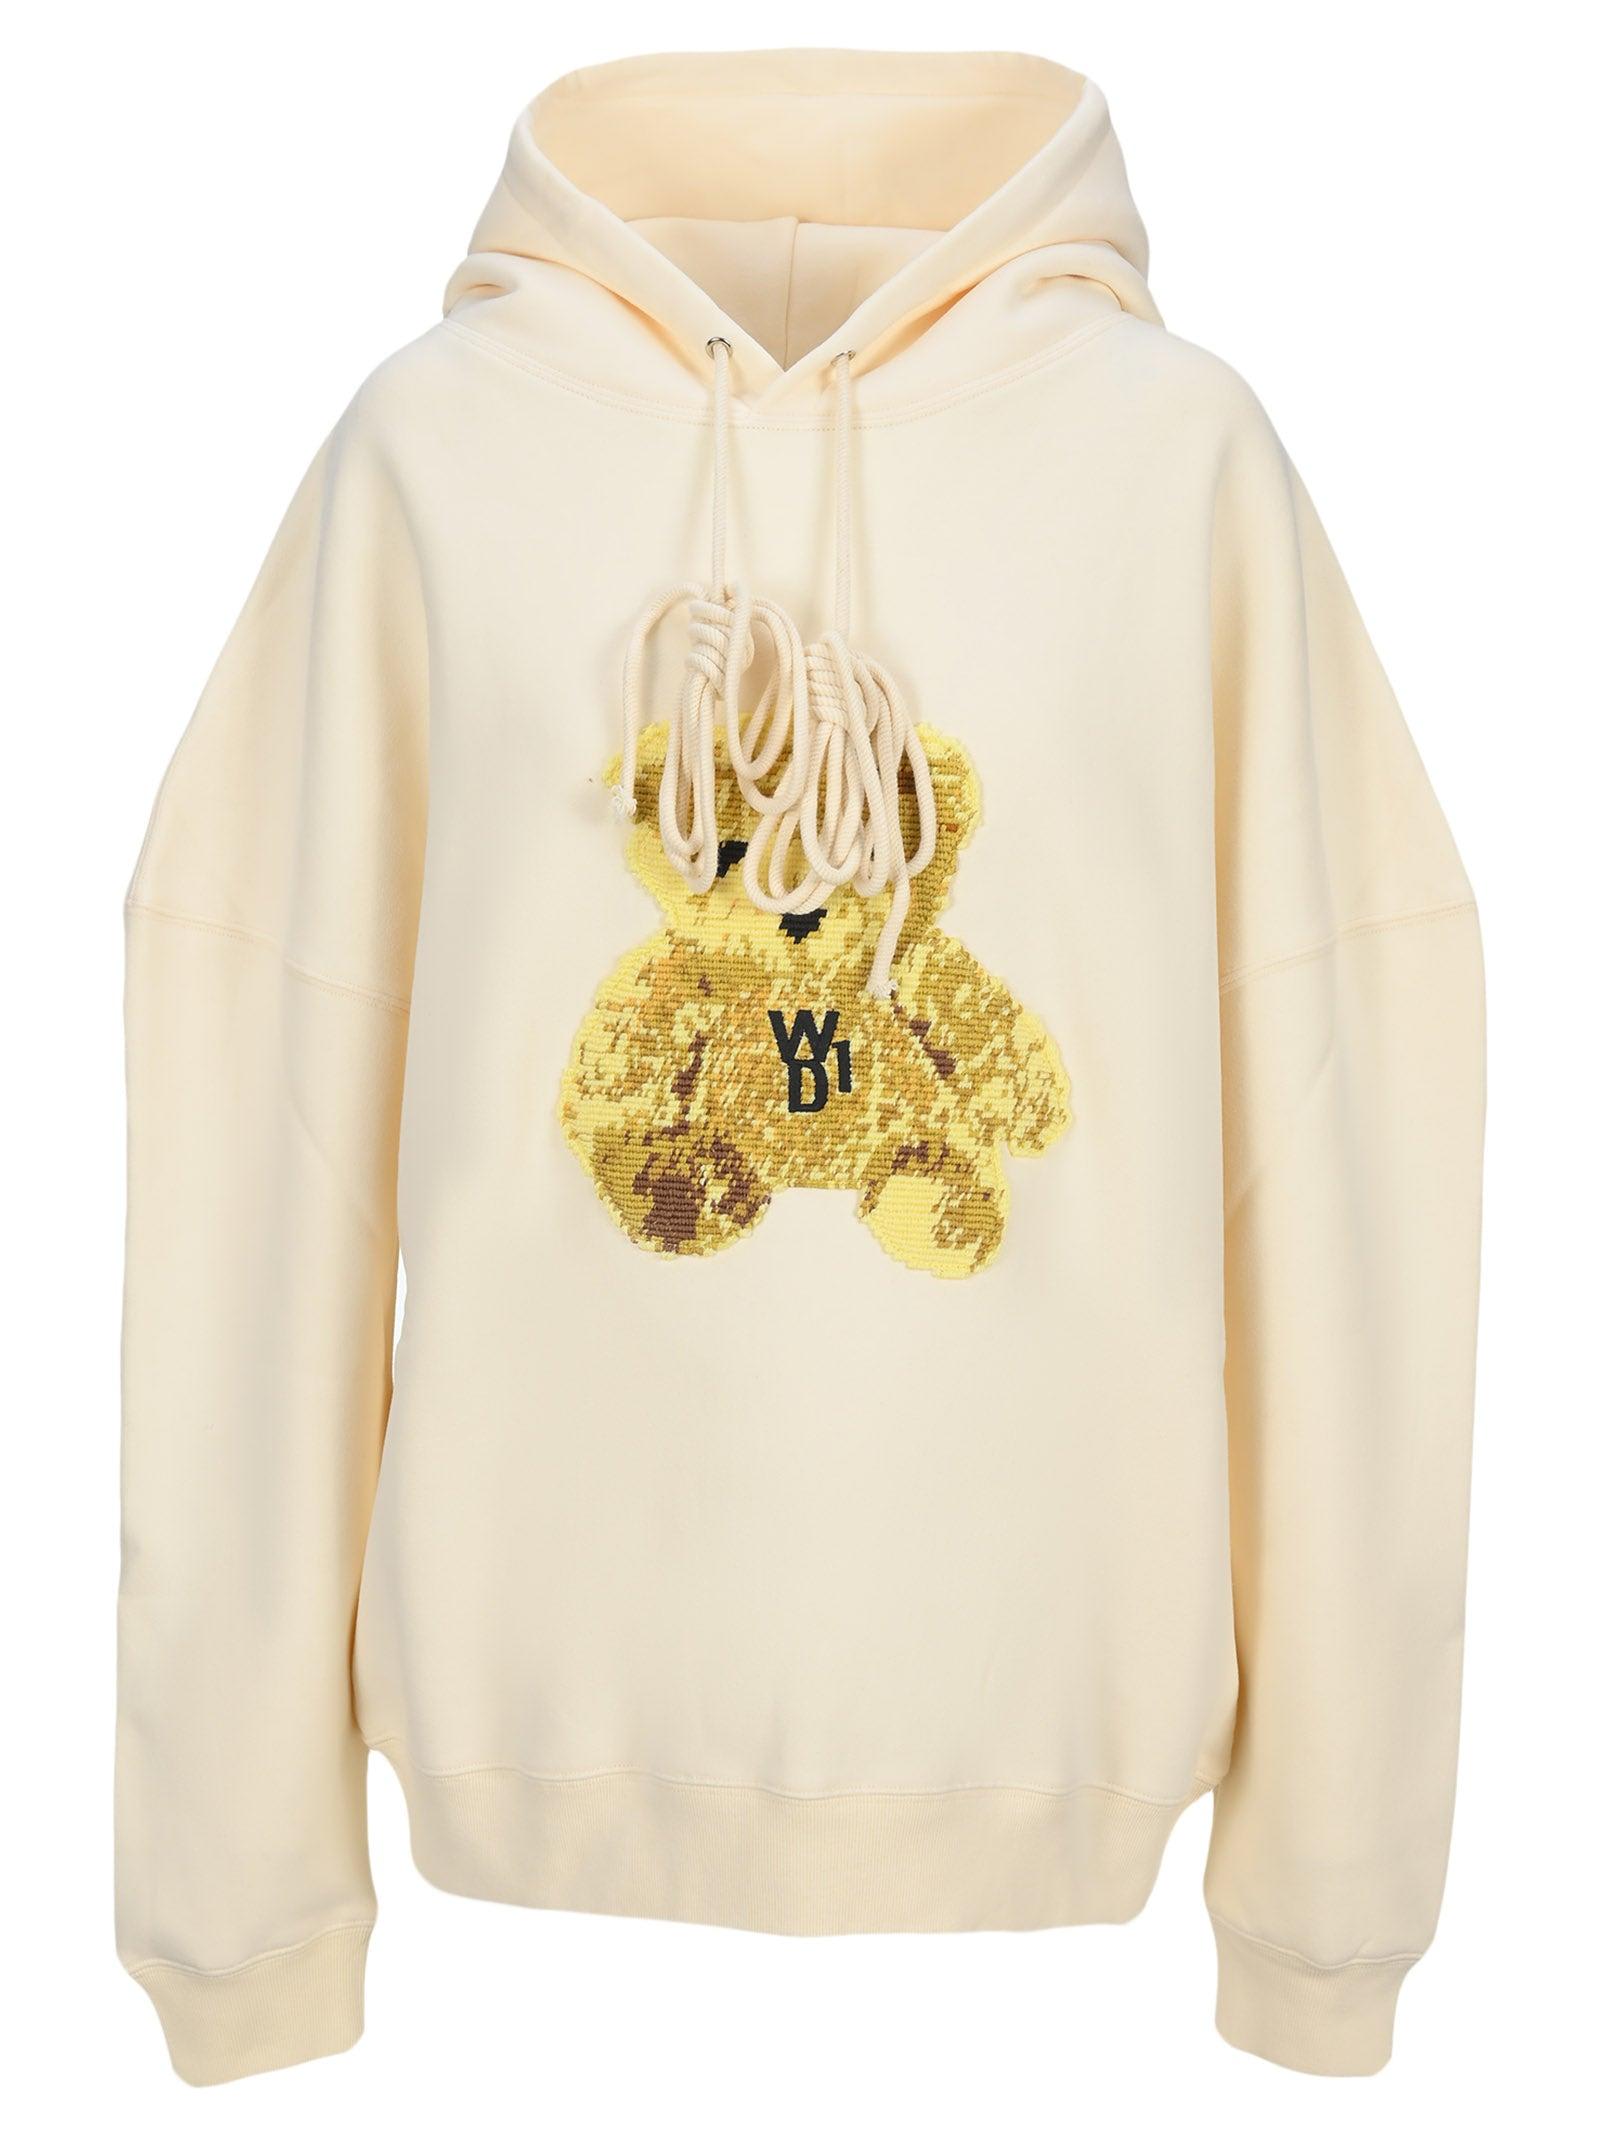 WE11 DONE Embroidered Teddy Drawstring Hoodie